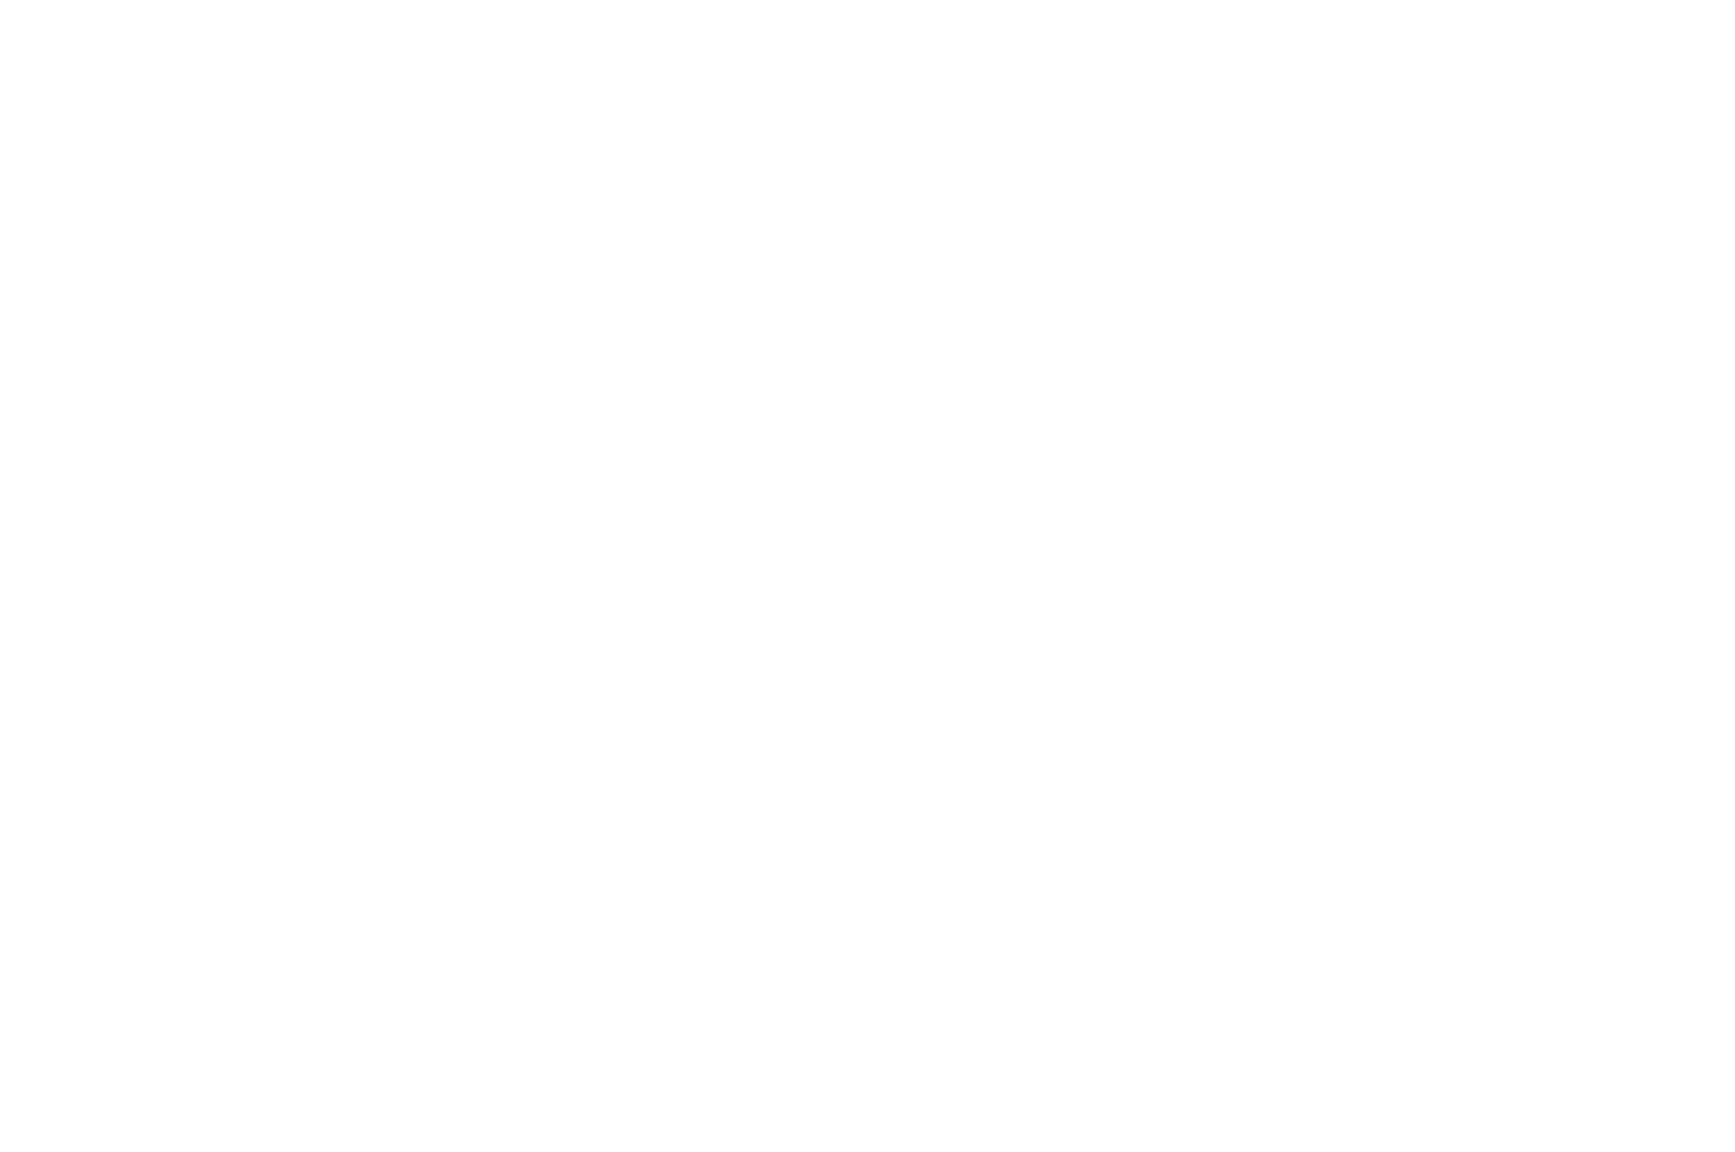 NOMINATION - BEST COMMERCIAL - Colorado Film and Video Association 2018.png